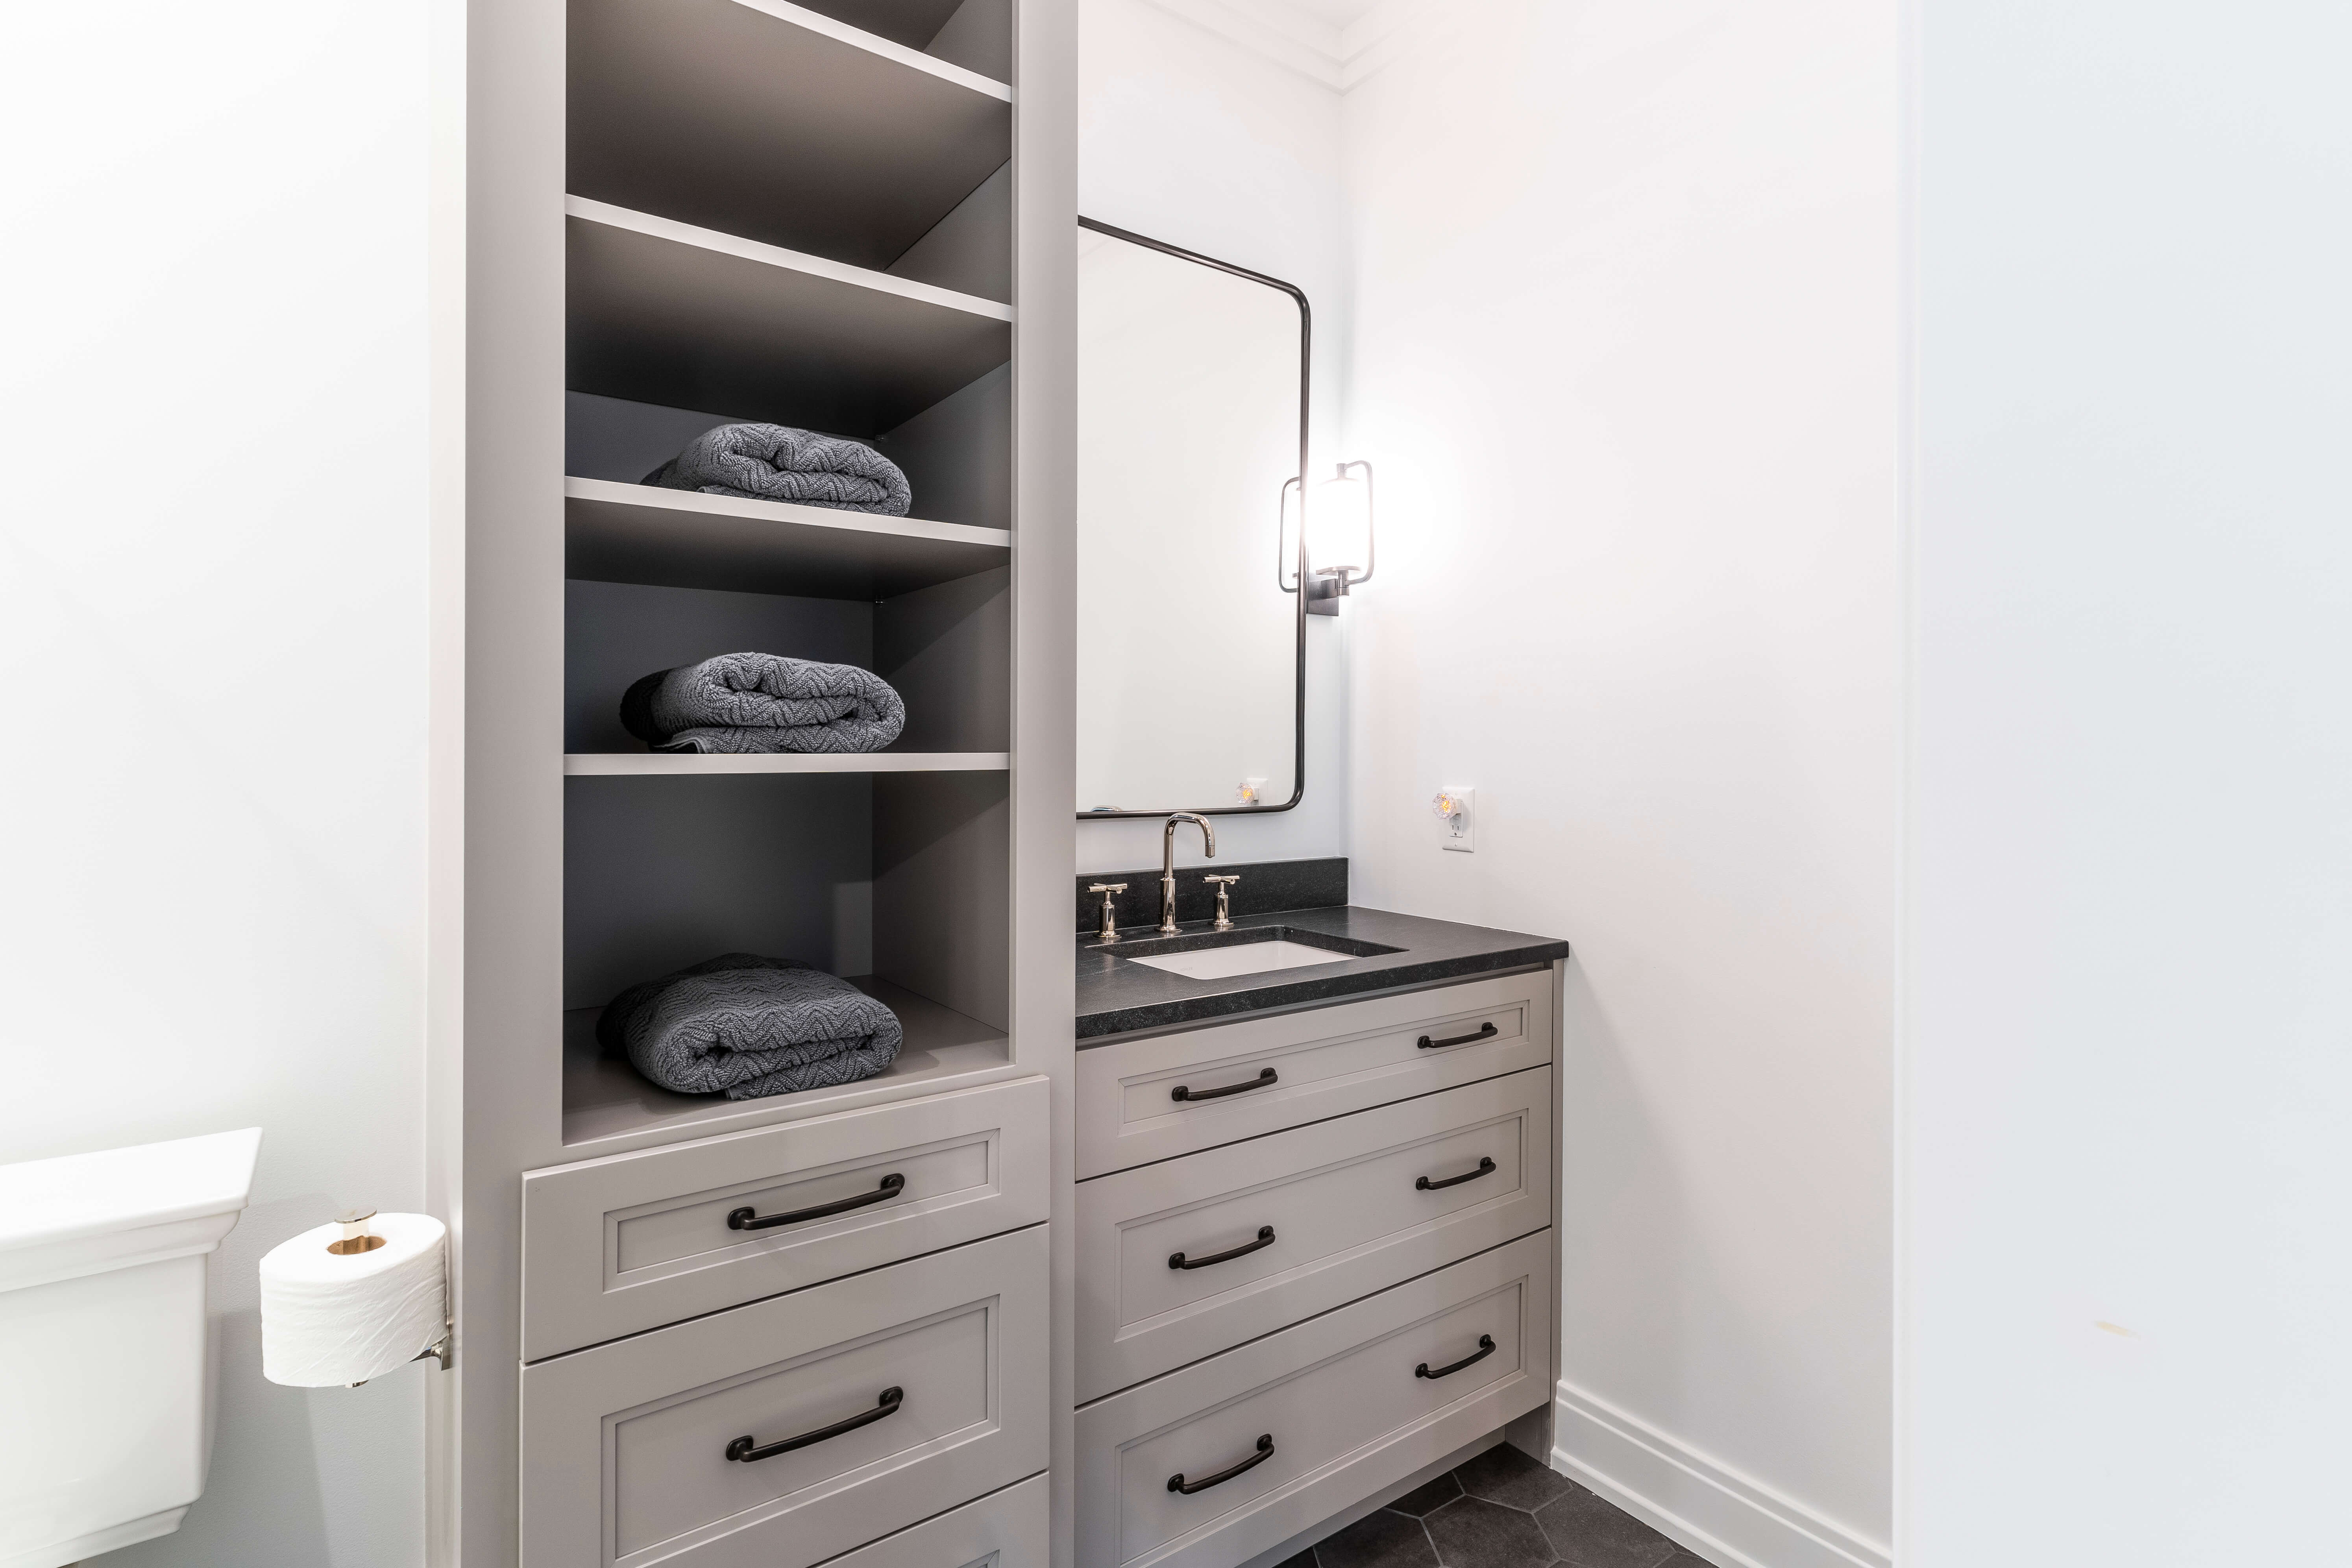 10 Storage Solutions for your Bathroom - Dura Supreme Cabinetry